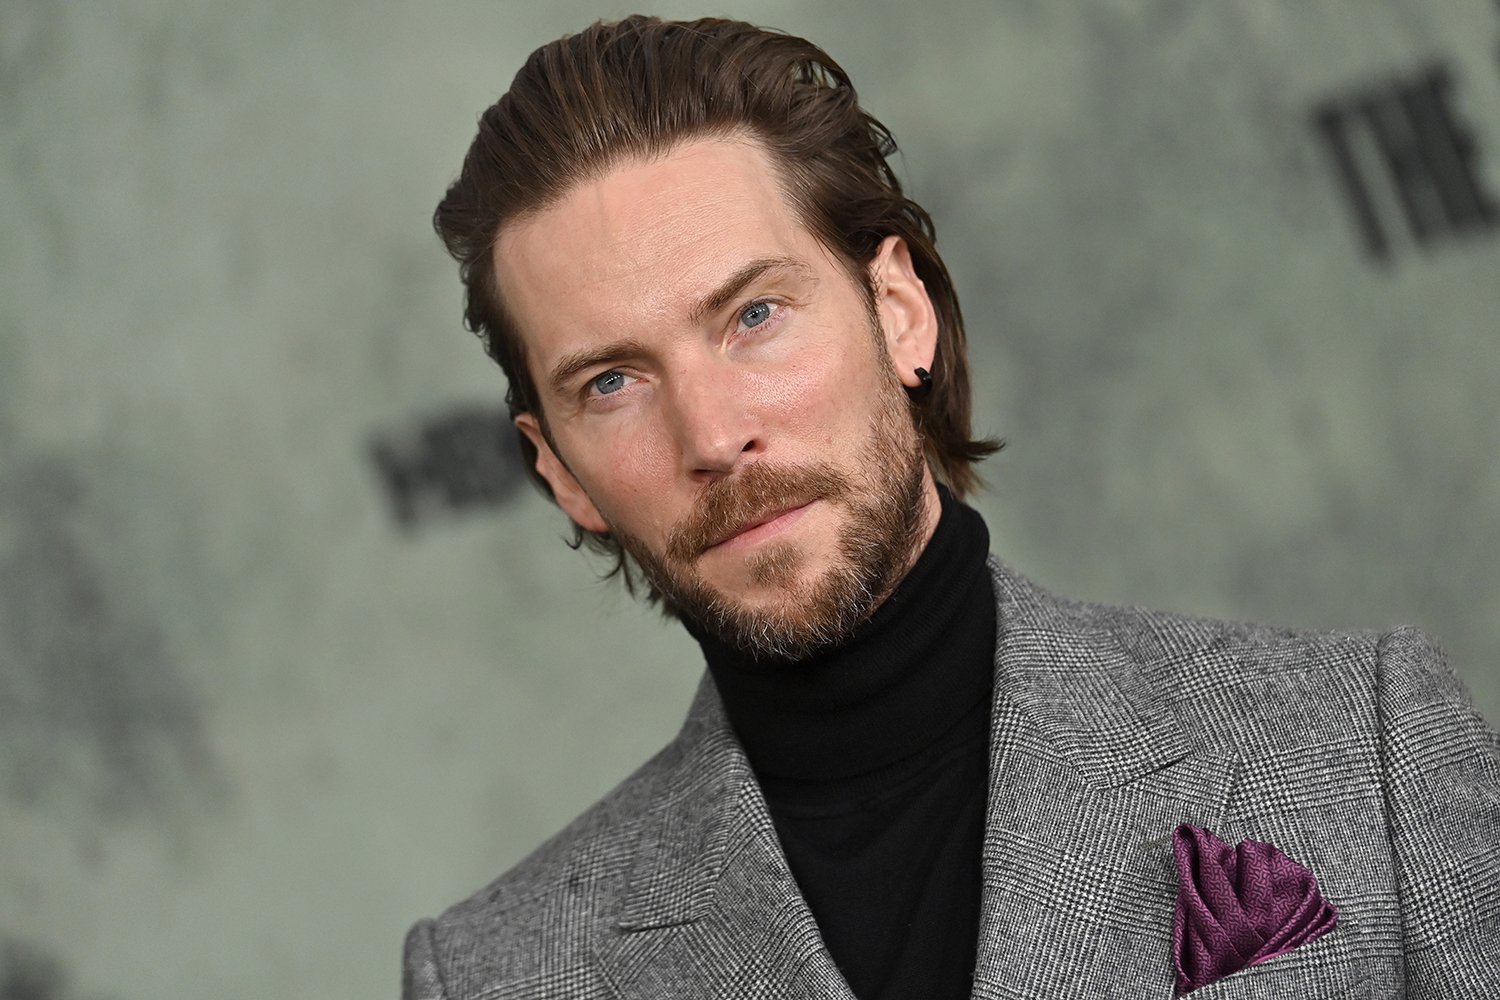 Joel actor Troy Baker claims ignorance on The Last of Us 2